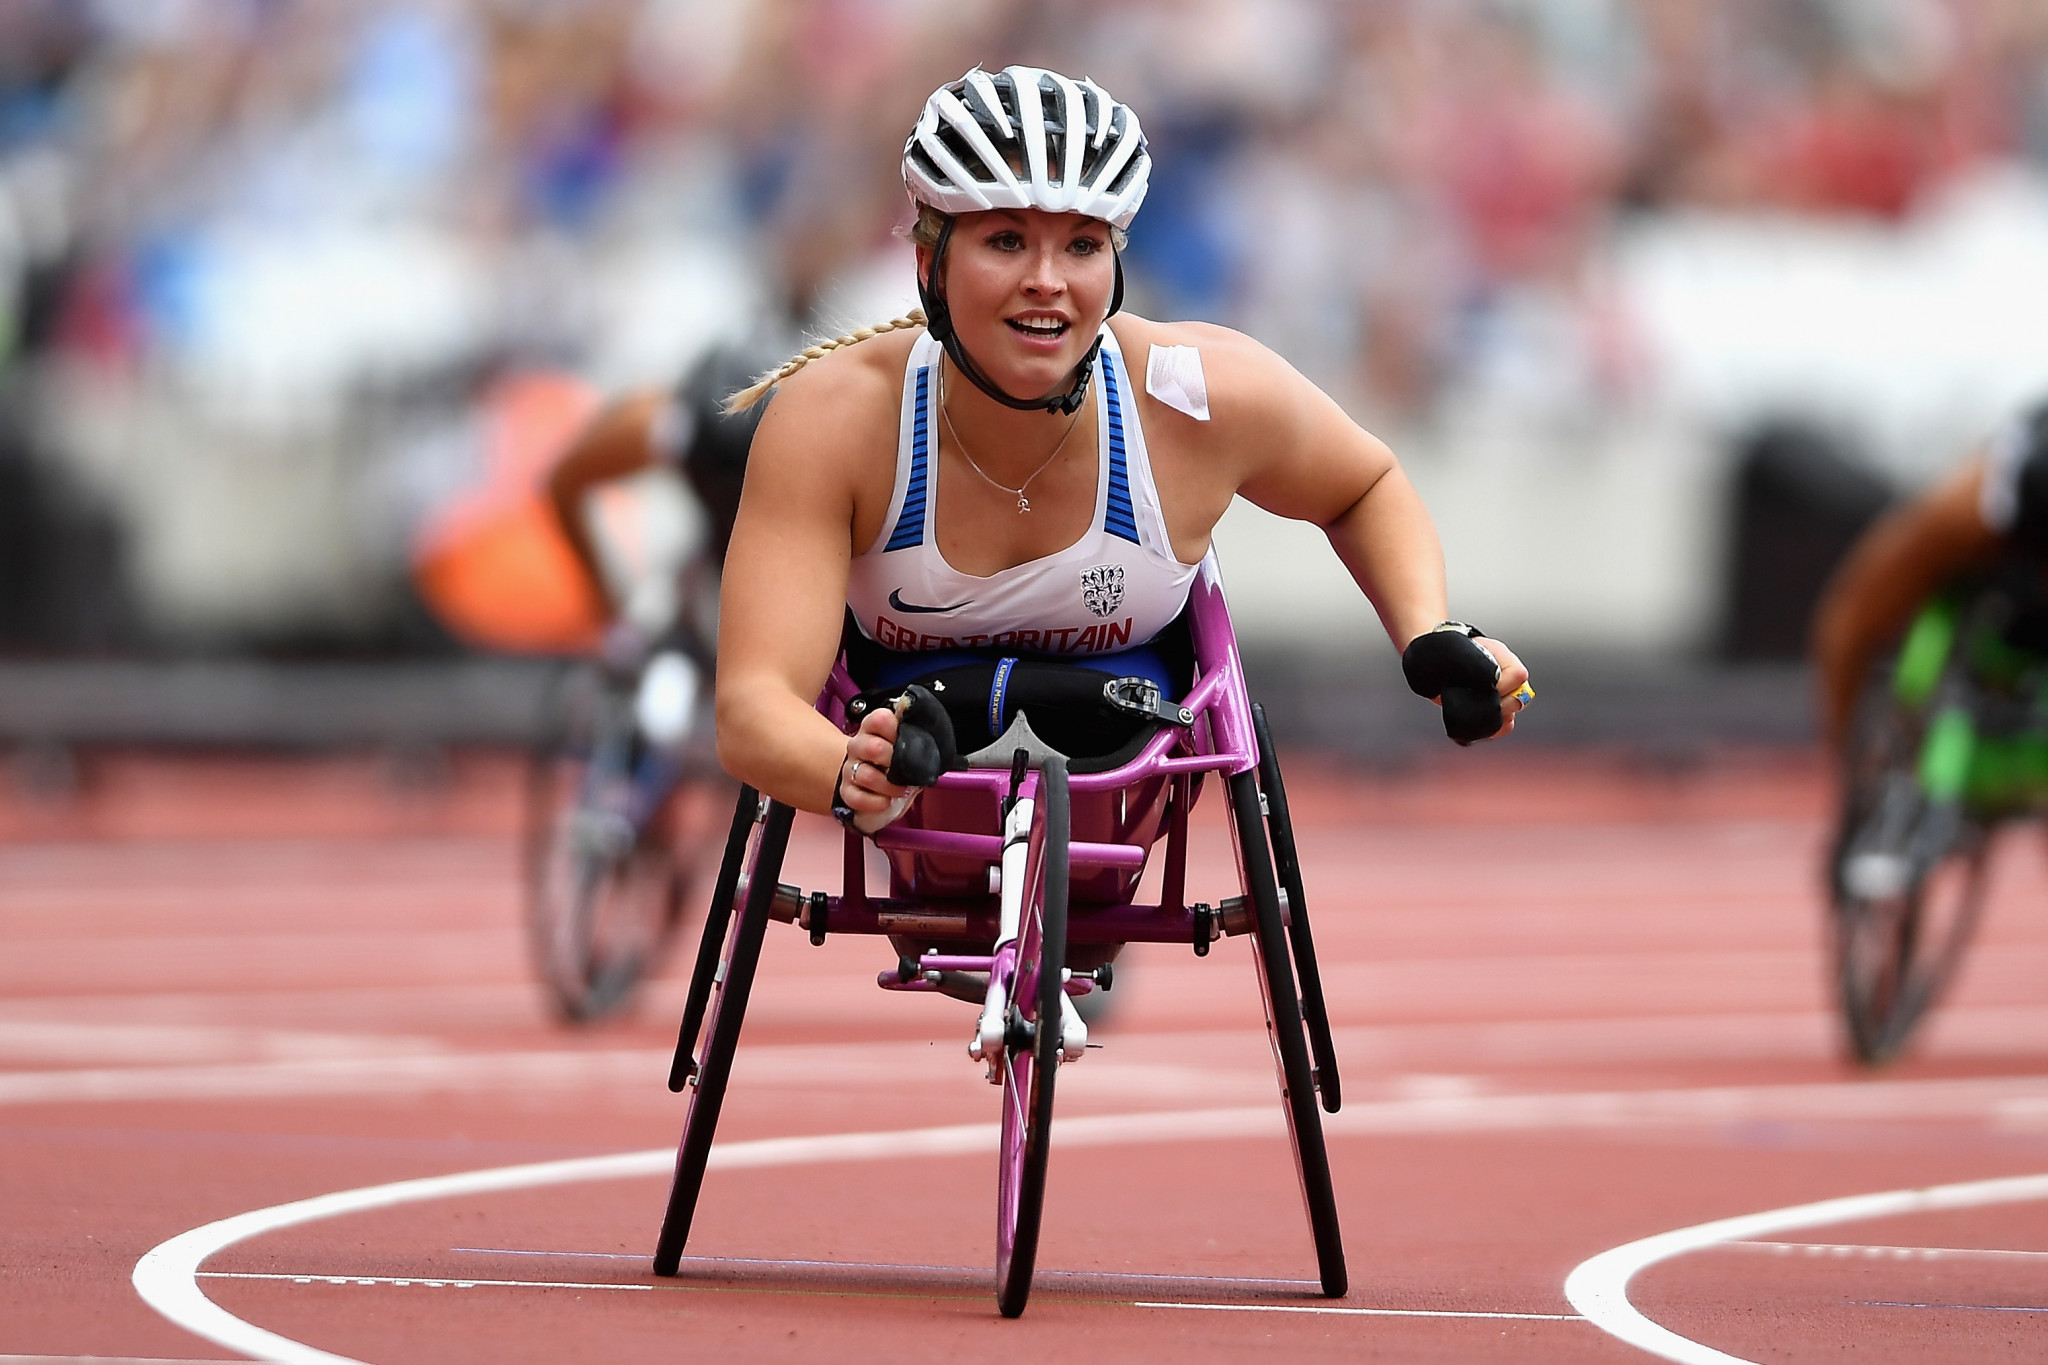 Britain's double world champion Sammi Kinghorn claimed gold in the women's 400 metres T53 event ©Getty Images